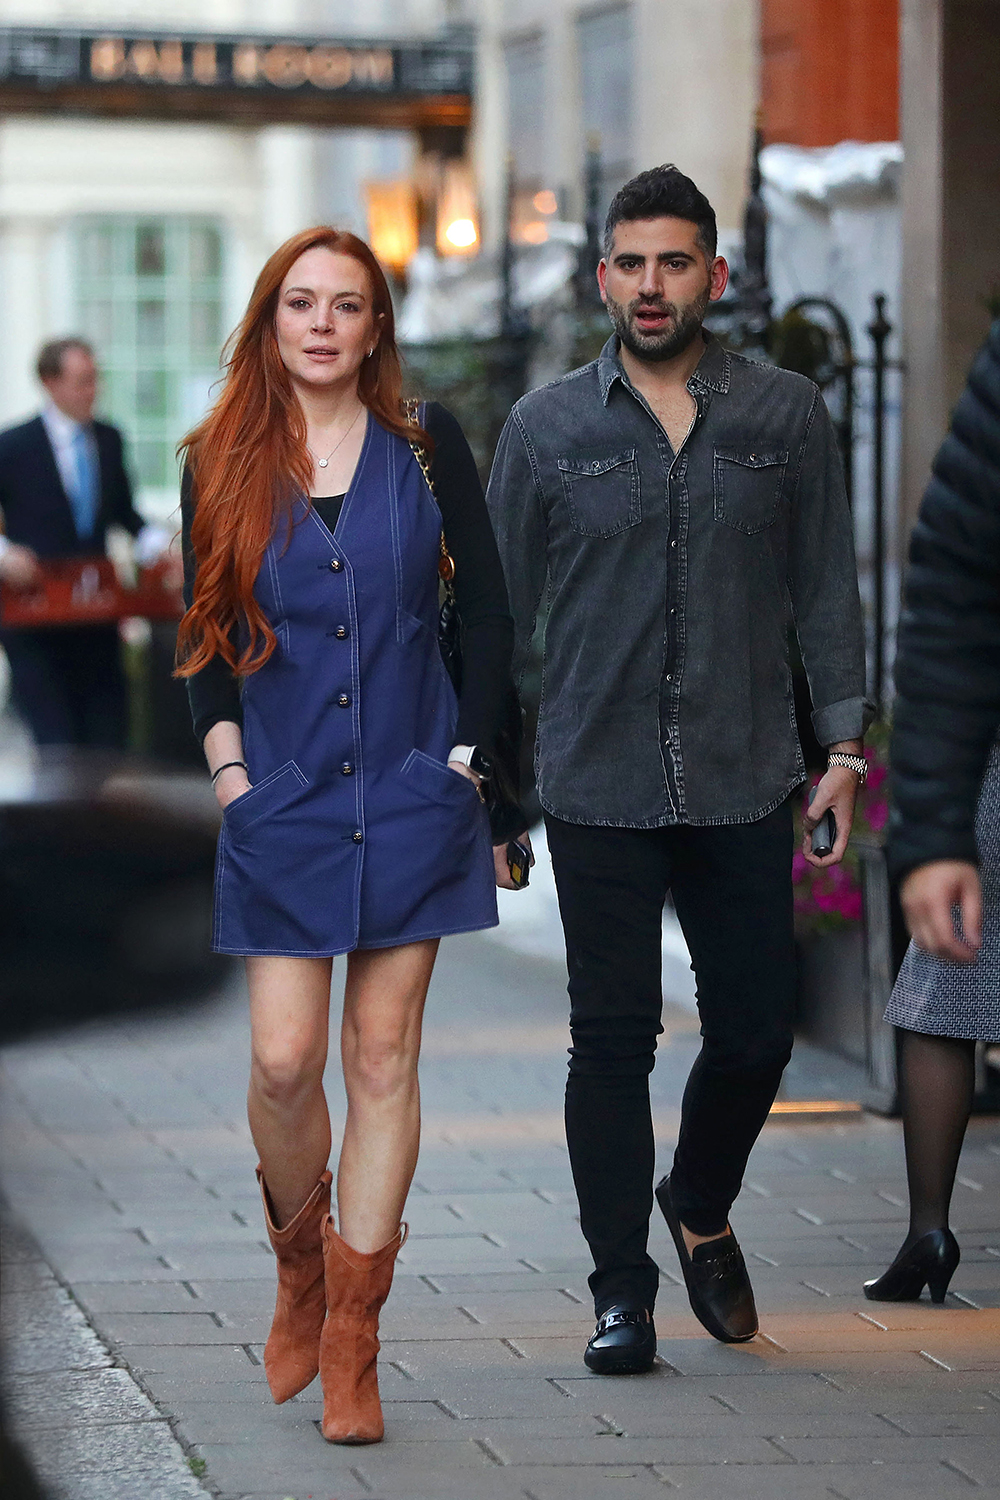 EXCLUSIVE: Lindsay Lohan looks so happy and healthy as she steps out with her new husband Bader Shammas in her first open public appearance together in London after secretly getting married. Lohan put on a radiant display as she joined her husband Bader Shammas for a day out in London. The actress, 36, looked sensational in a button-up sleeveless Chanel dress and handbag and suede ankle boots as she strolled through the capital. The newlyweds were beaming as they took the time to snap some selfies with fans. Shammas is the vice president at Dubai-based Credit Suisse bank. 24 Aug 2022 Pictured: Lindsay Lohan, Bader Shammas. Photo credit: MEGA TheMegaAgency.com +1 888 505 6342 (Mega Agency TagID: MEGA889196_001.jpg) [Photo via Mega Agency]